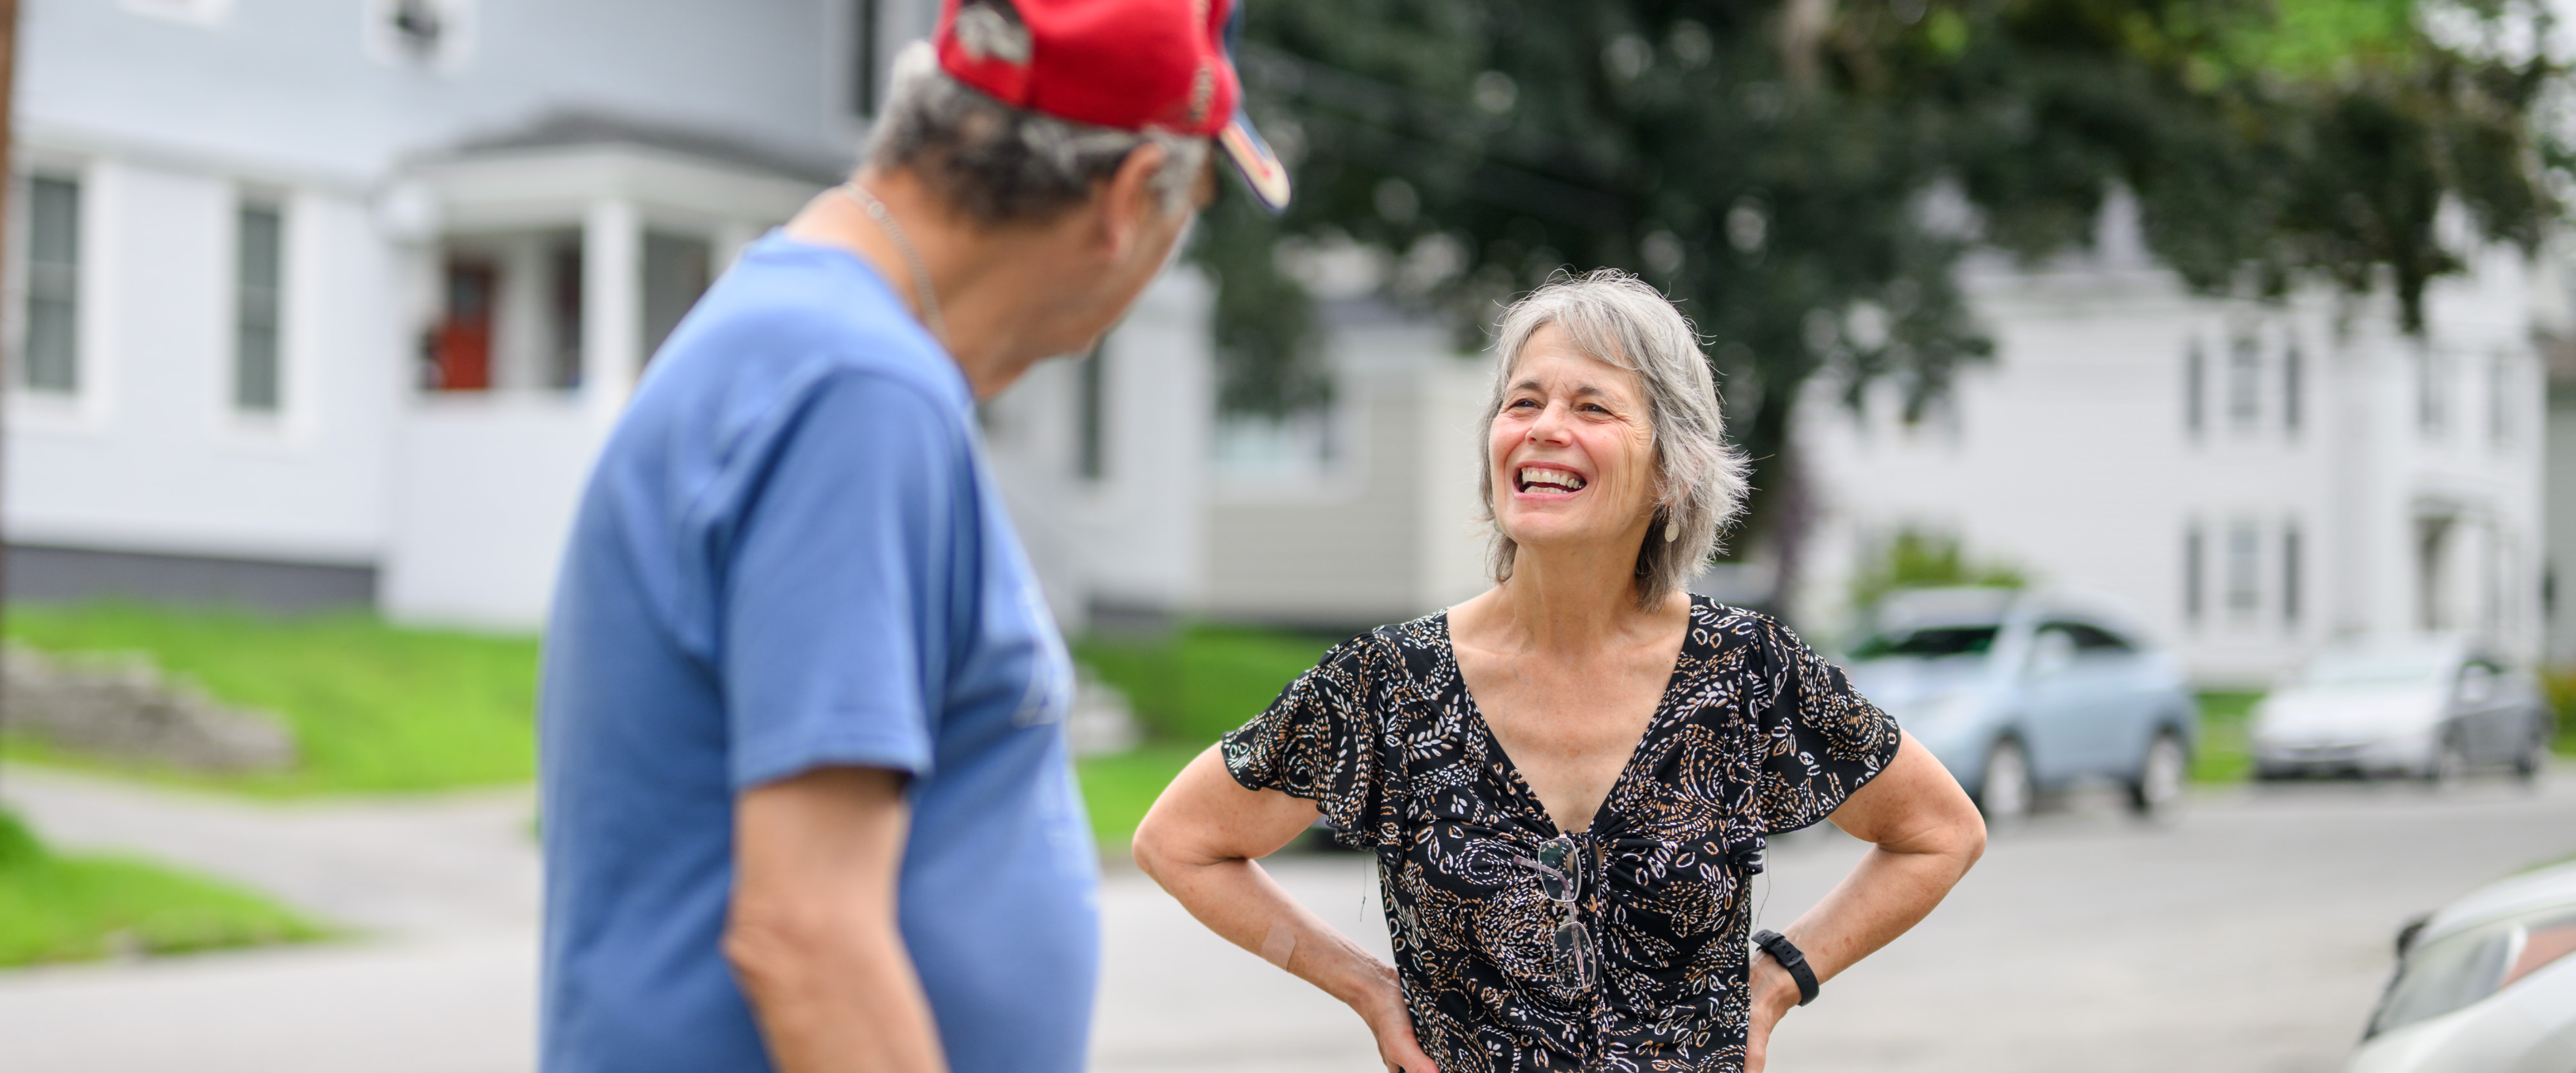 A staff member and a client share a laugh outside a homeless shelter in Brunswick, Maine.